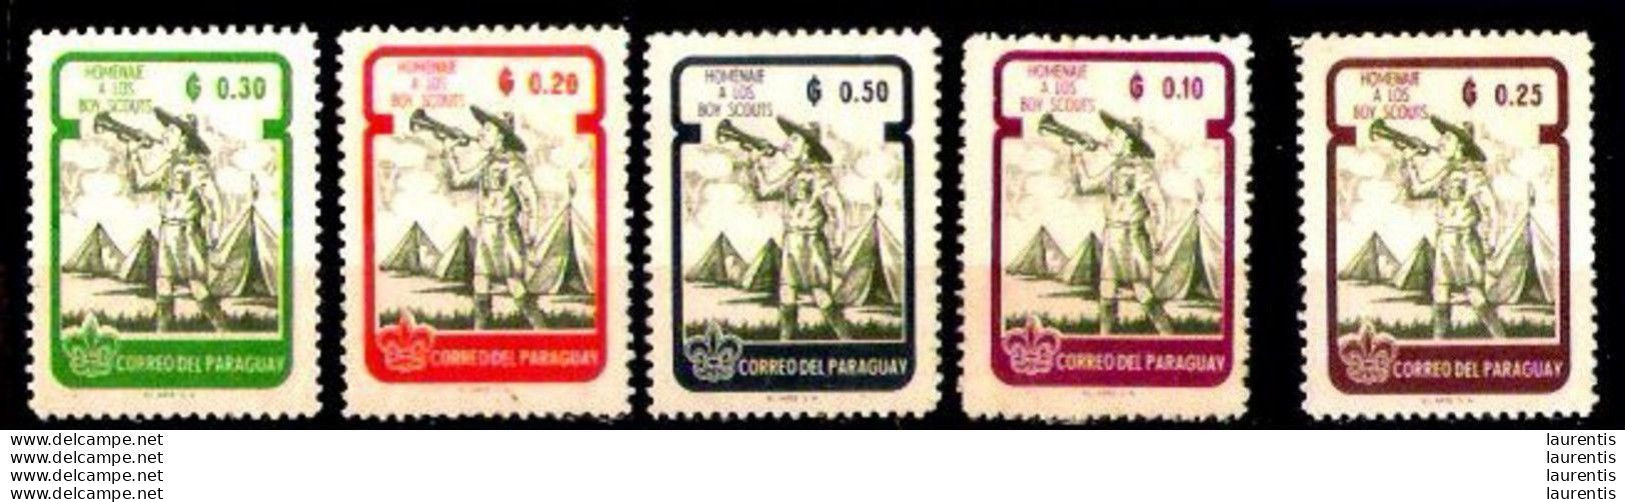 24621  Scouts - Music - Paraguay Yv 648-52 - Hinged - 1,15 - Unused Stamps